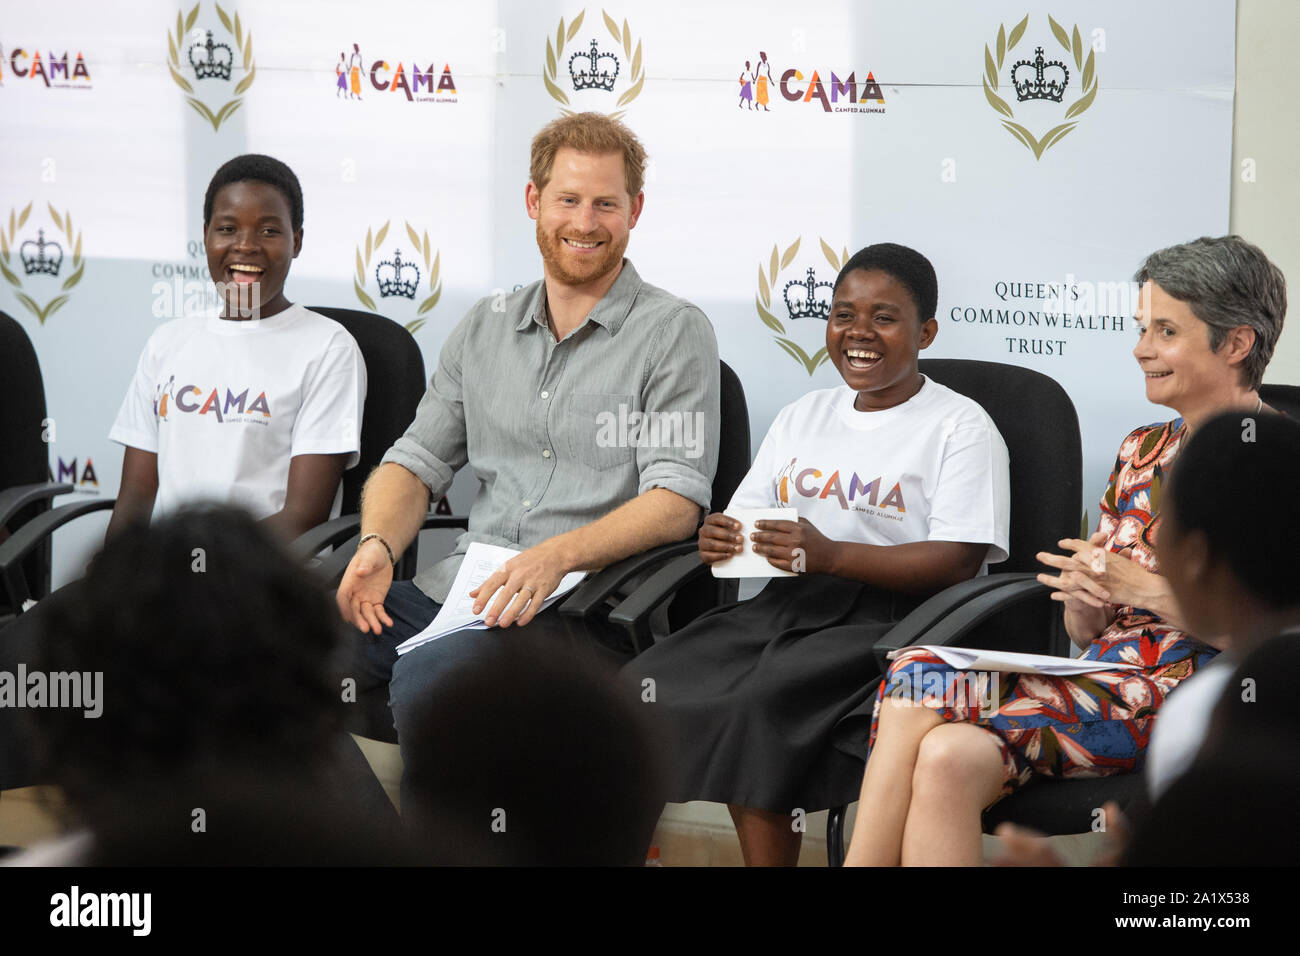 The Duke of Sussex during a visit to the Nalikule College of Education in  Lilongwe, Malawi, to see the work of the CAMA network supporting young  women in Malawi Stock Photo -